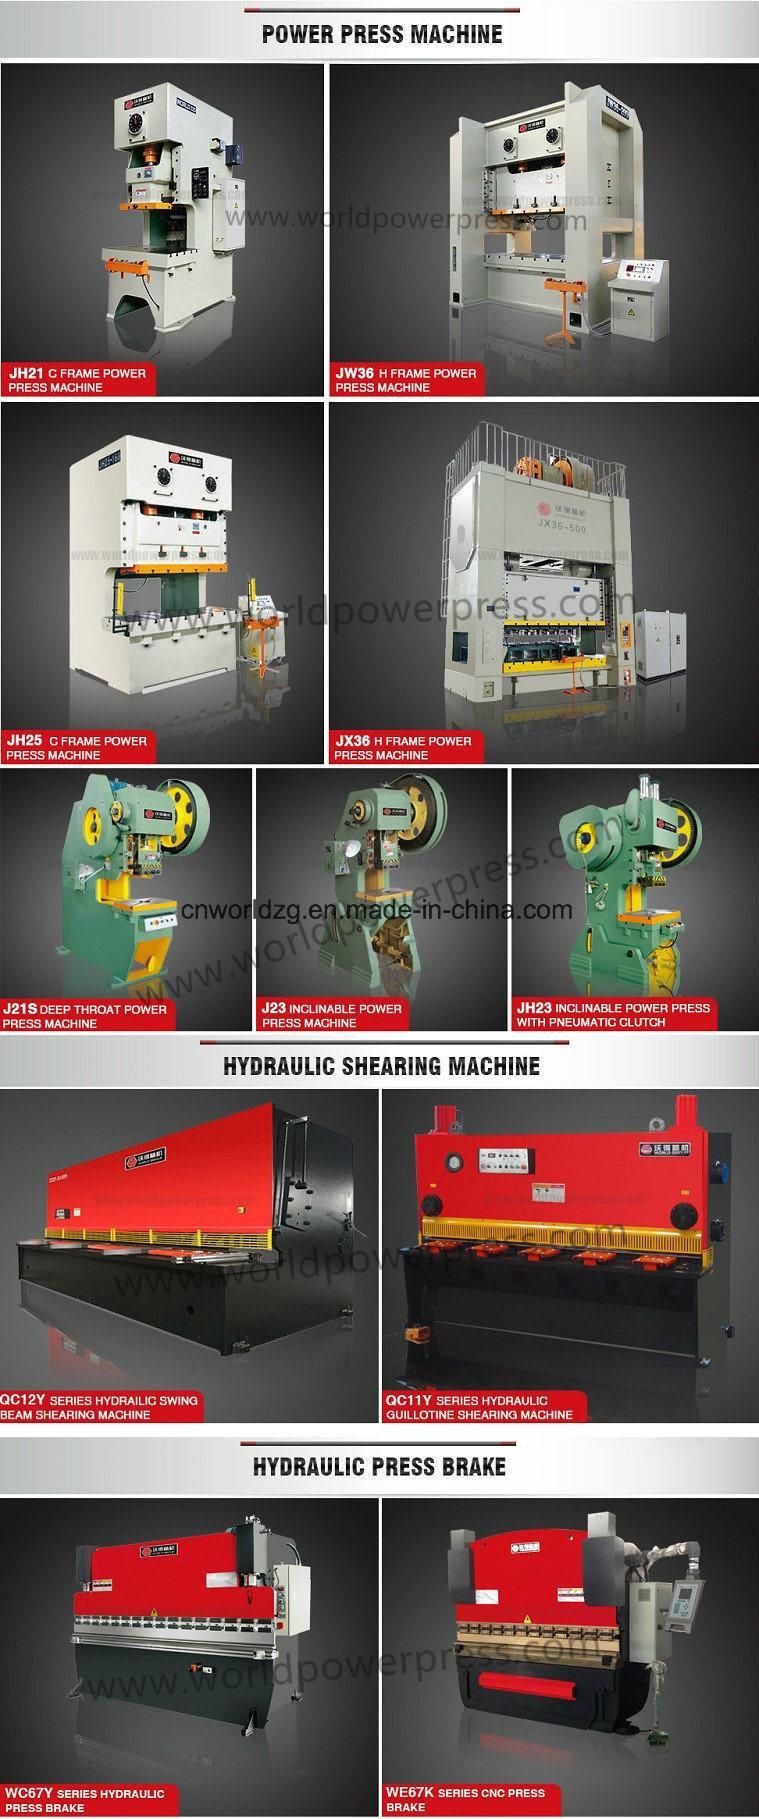 10mm Thick Sheet Metal Shearing Machine with Hydraulic Power